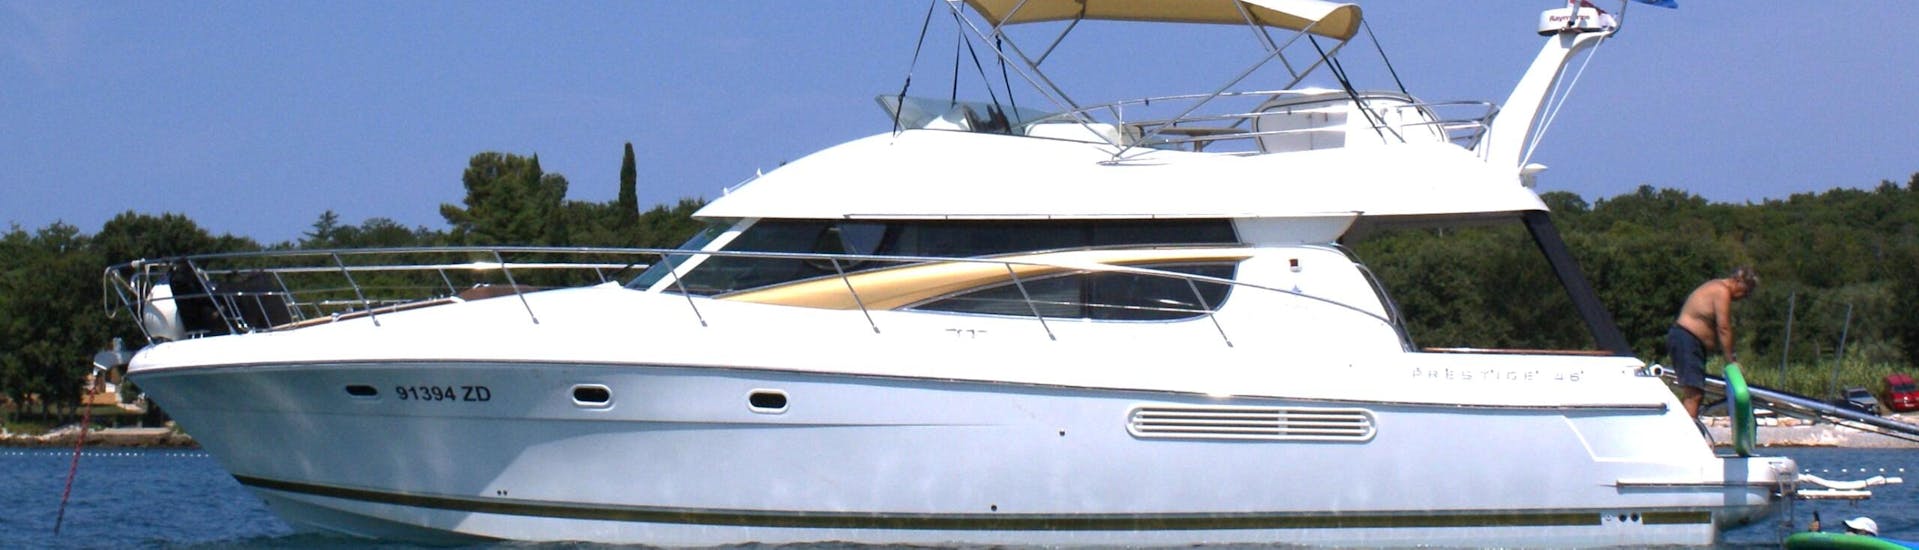 Here is the yacht you can rent with Anima Maris Daily Charters Istria.